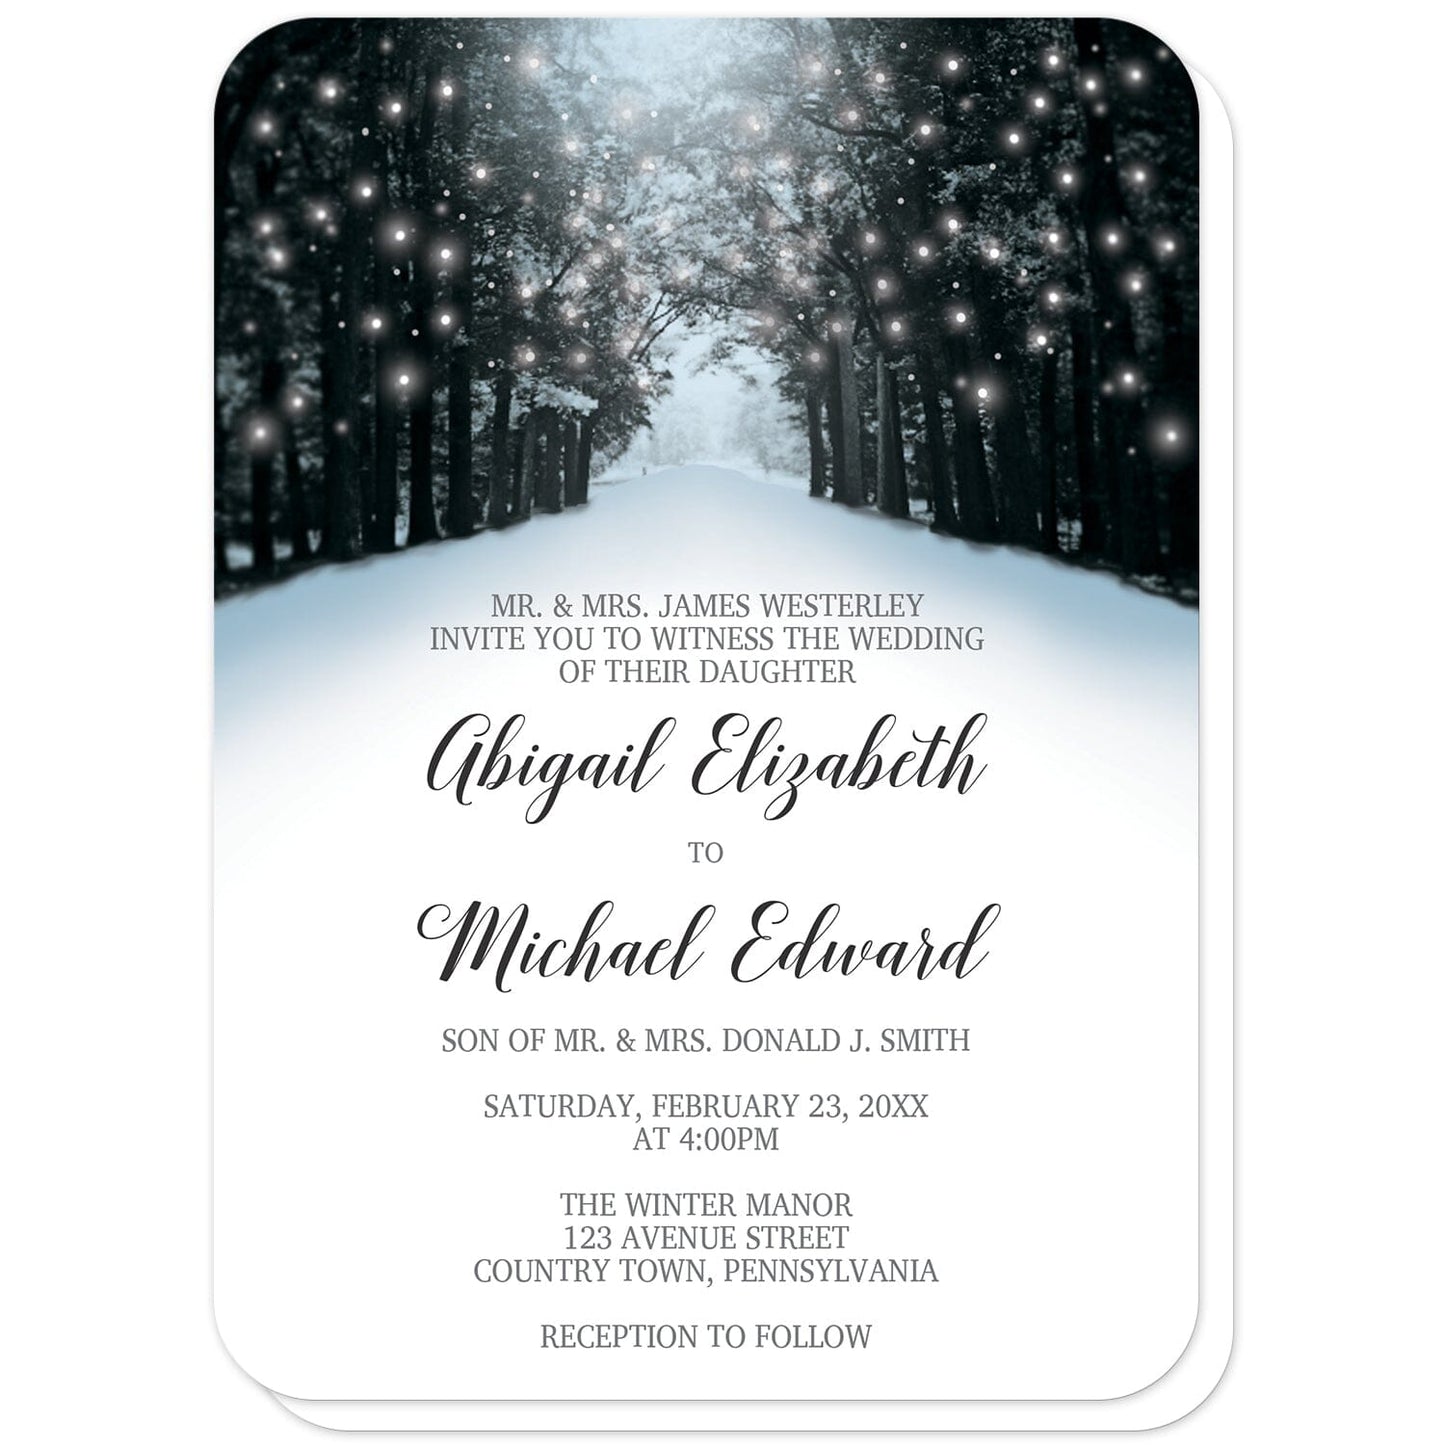 Snowy Winter Road Tree Lights Wedding Invitations (with rounded corners) at Artistically Invited. Beautiful snowy winter road tree lights wedding invitations with a snowy tree lined road filled with white holiday lights. They're designed in a blue, black, and gray winter color scheme with a winter wonderland theme. Your personalized marriage celebration details are custom printed in black and gray over a snow white background below the snowy road design.